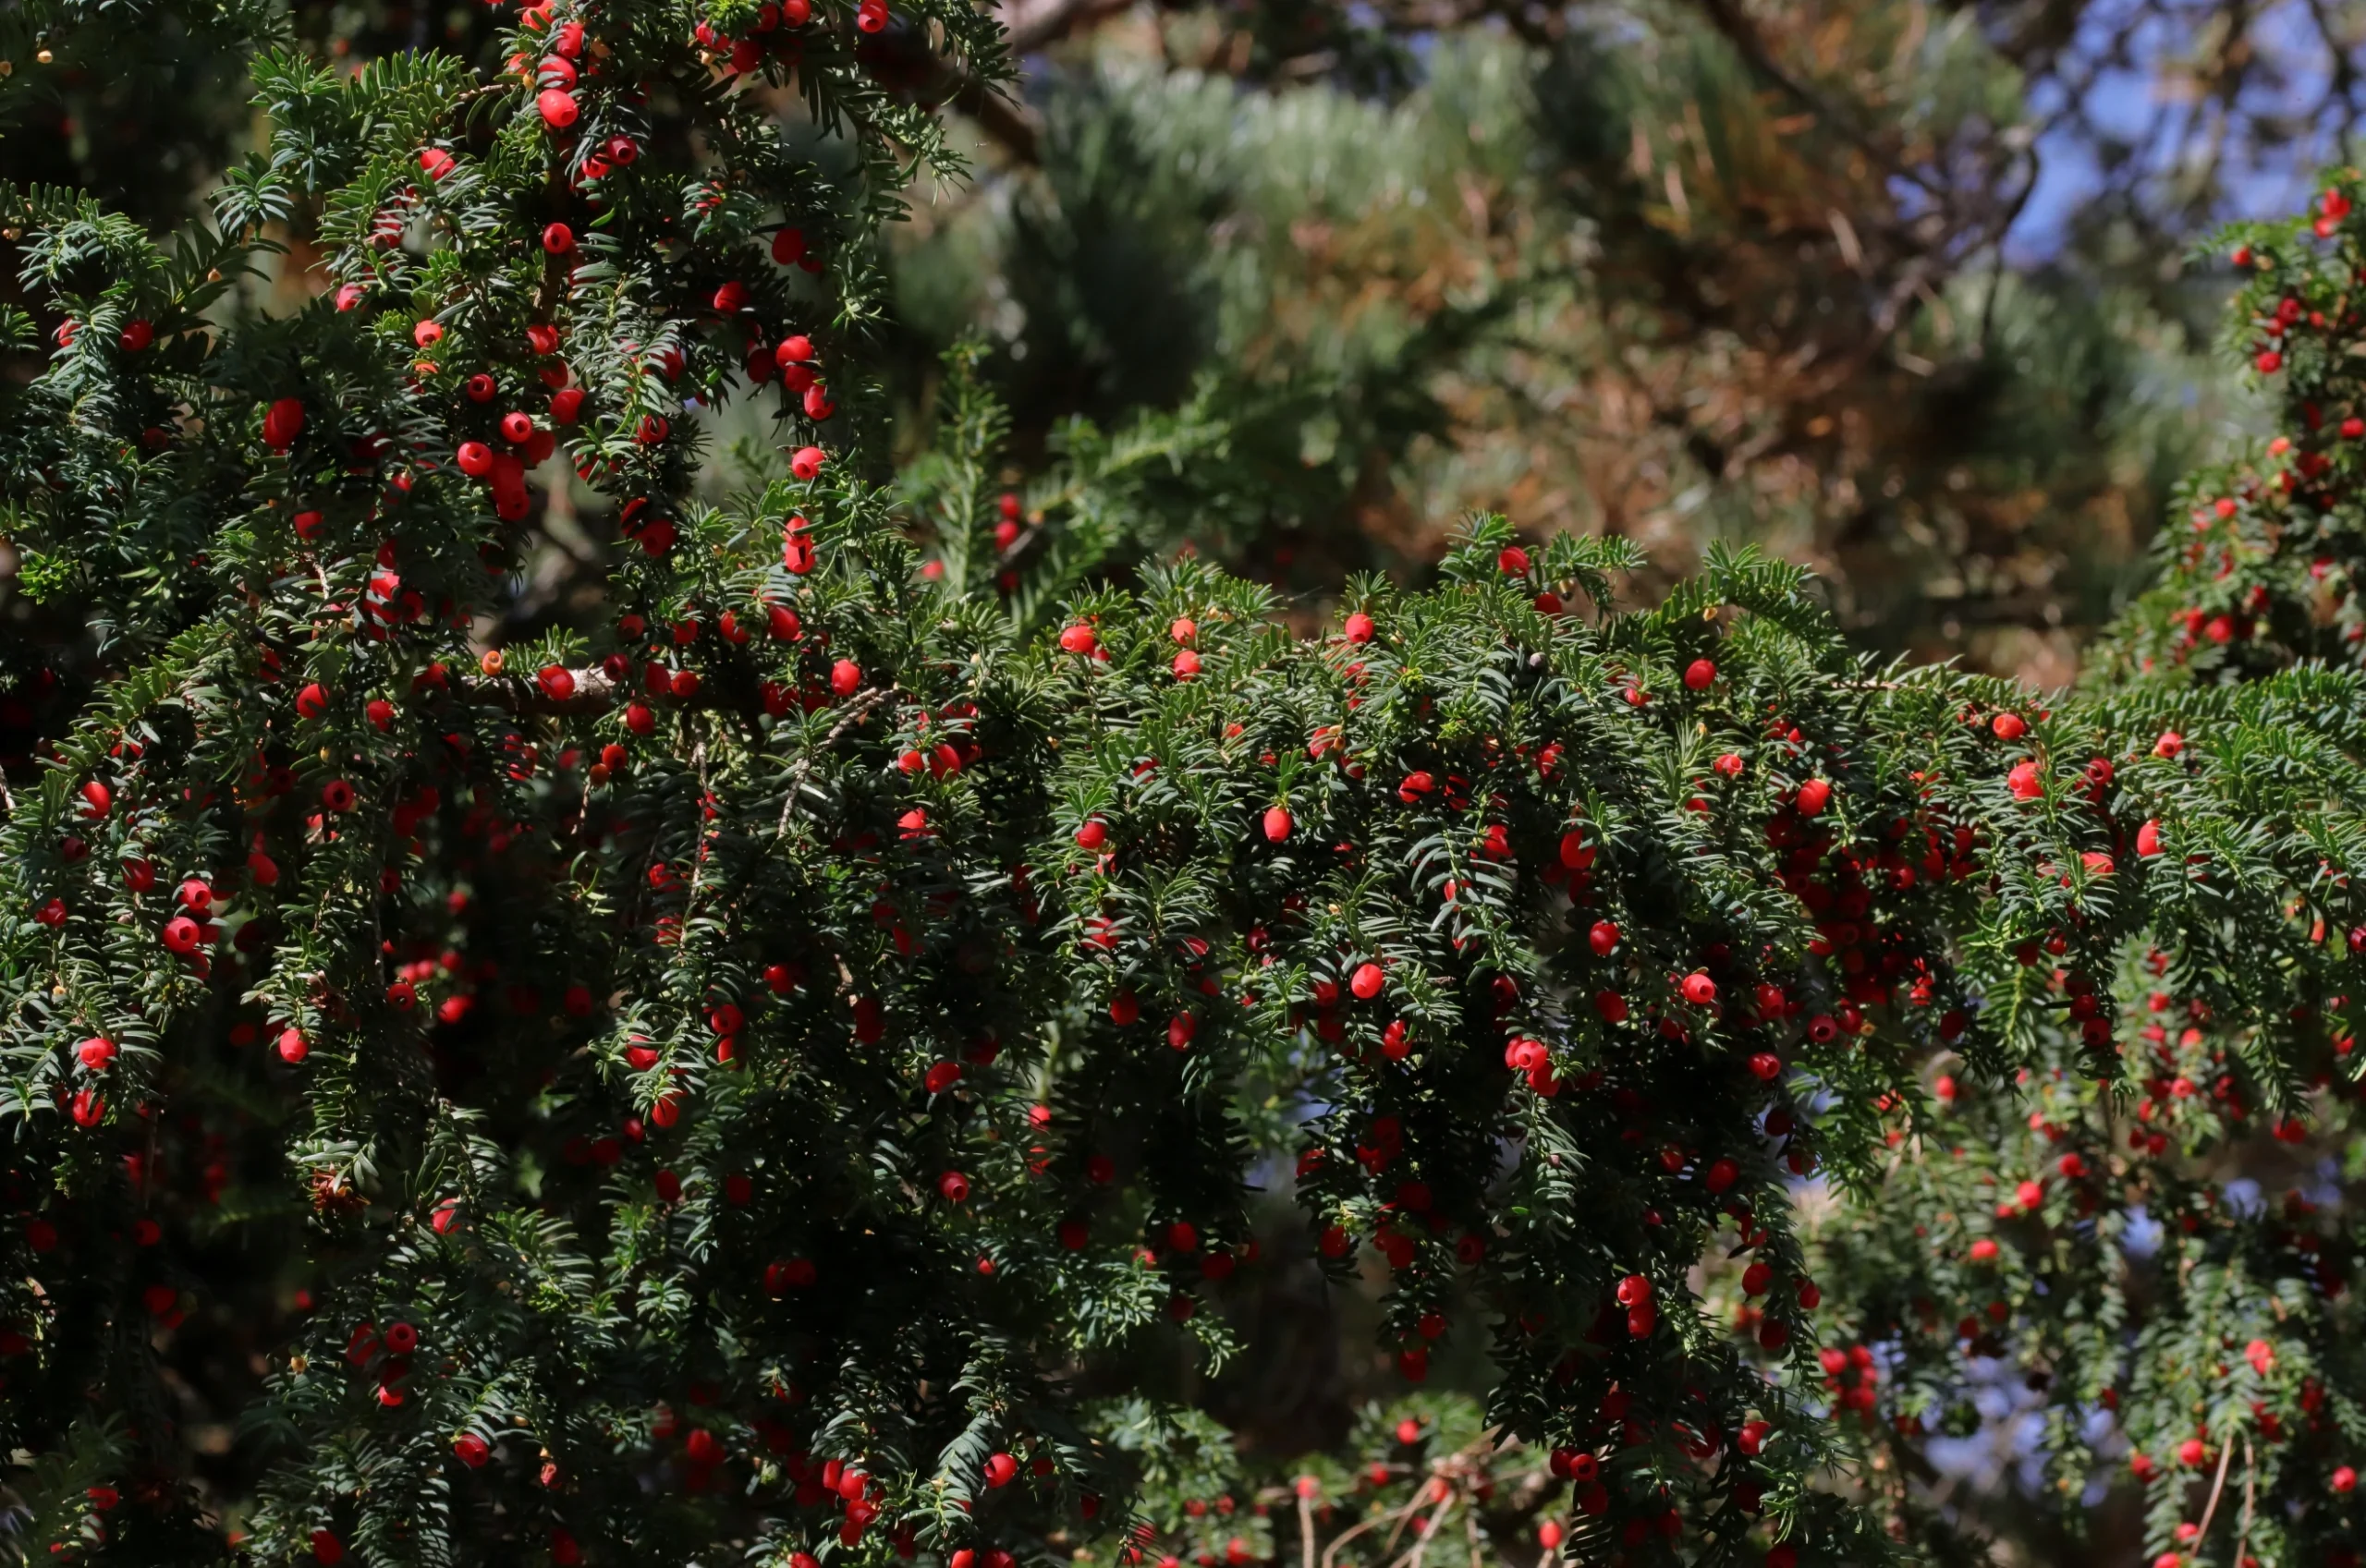 The red-coloured, round fruits of the european yew with a black core